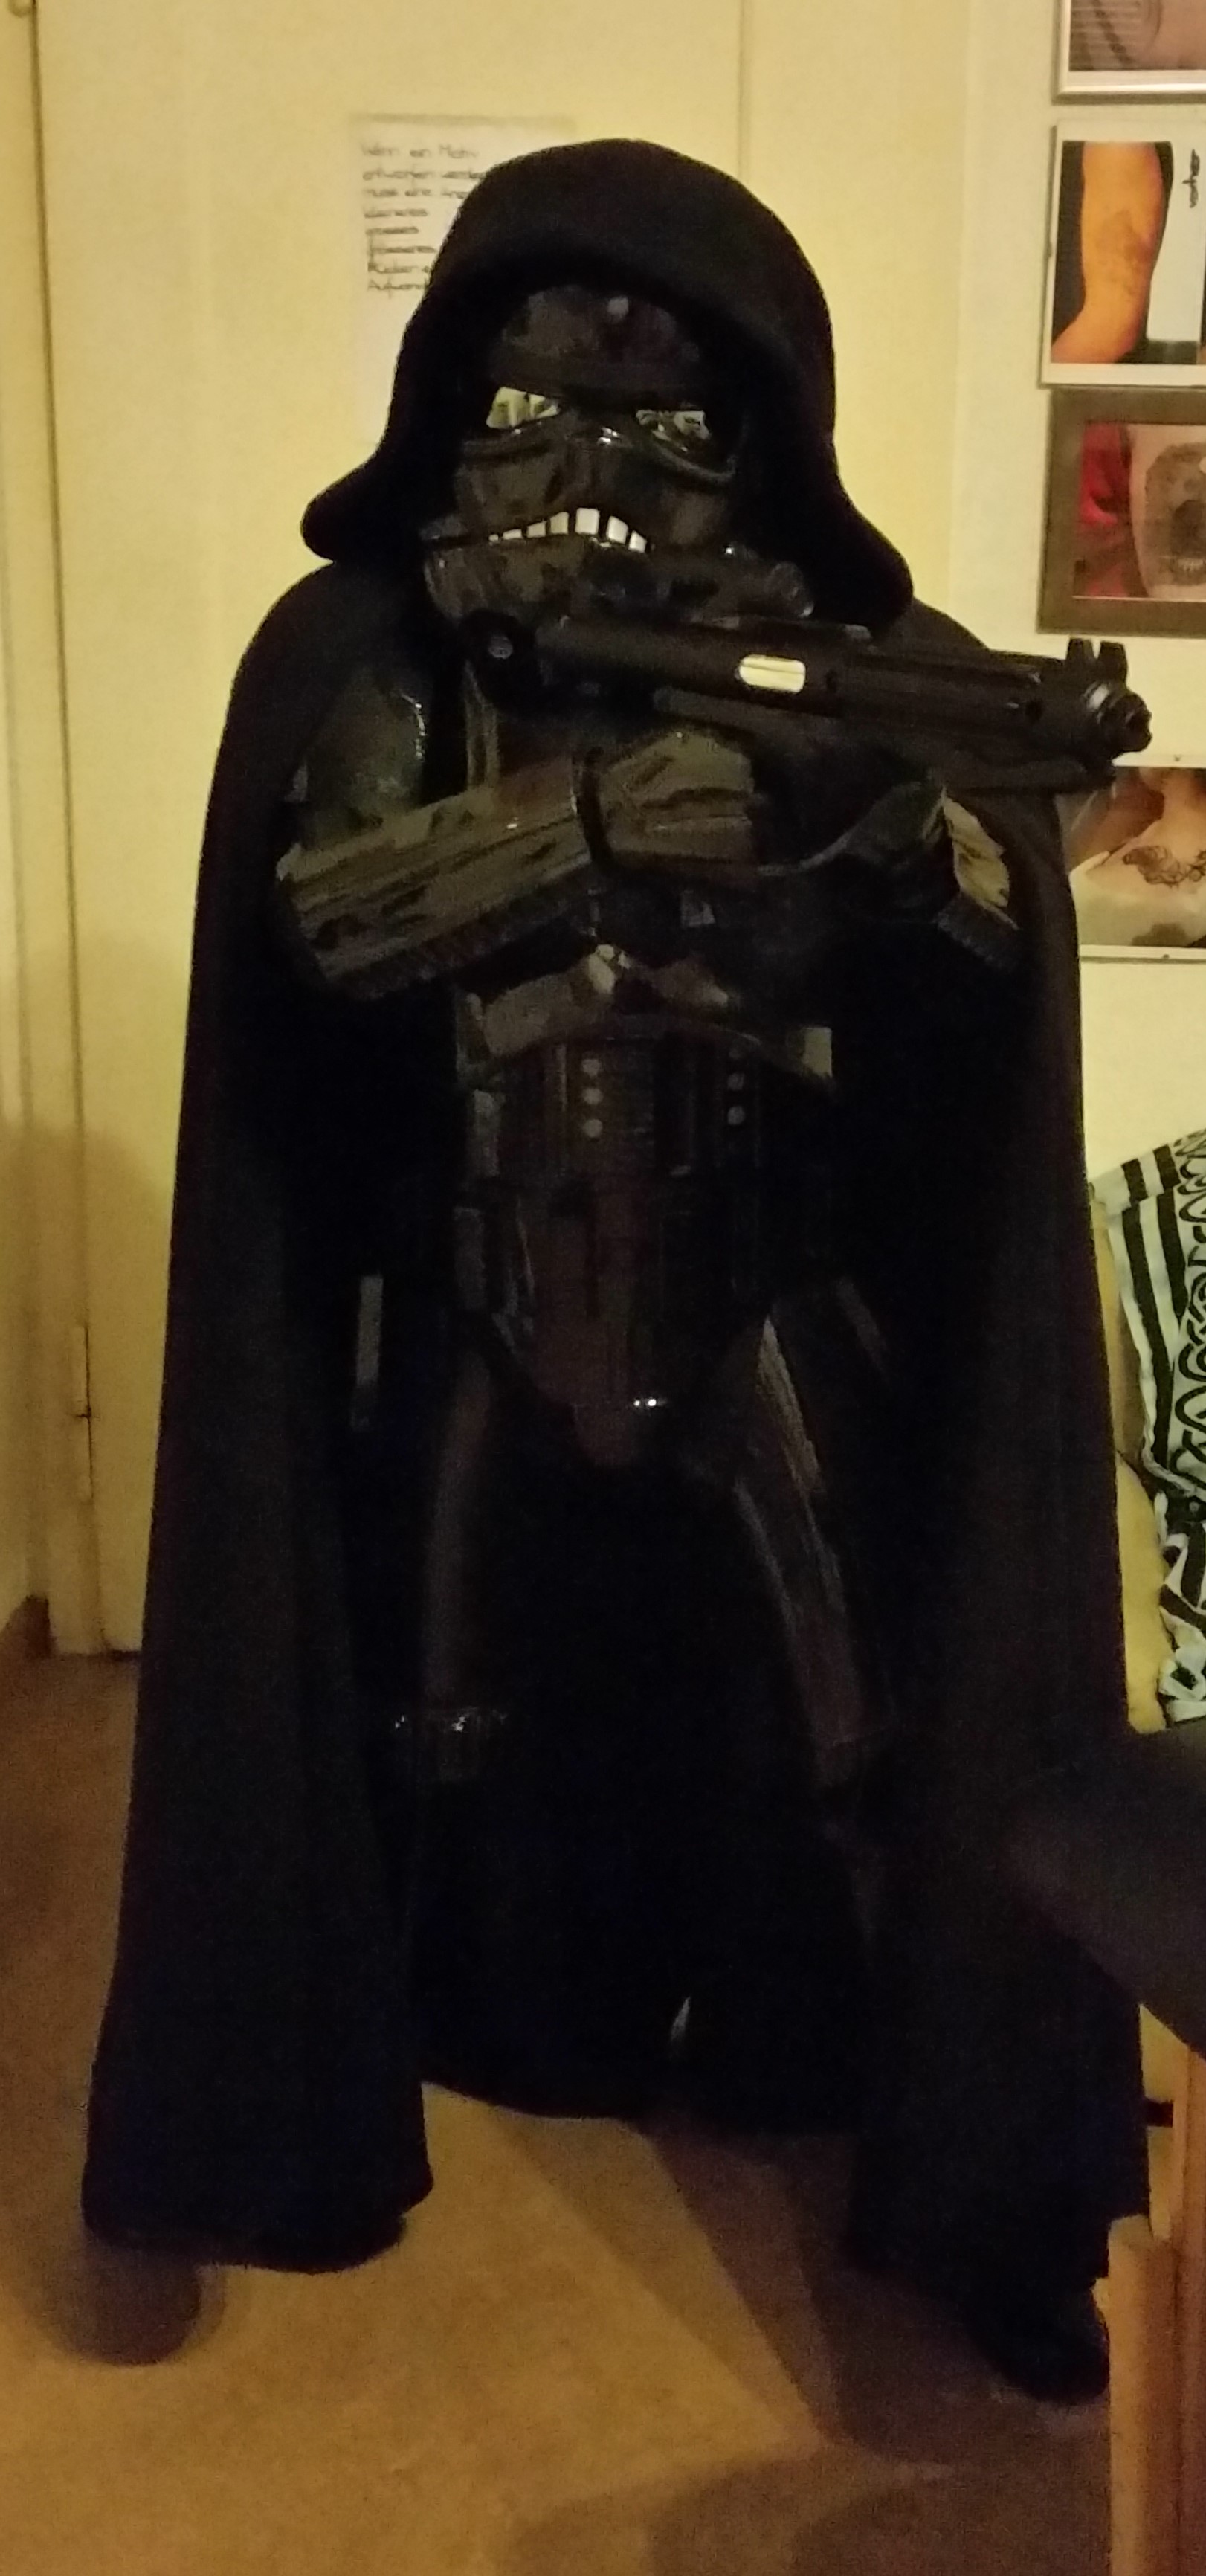 Rolf costume review armor replica shadowtrooper